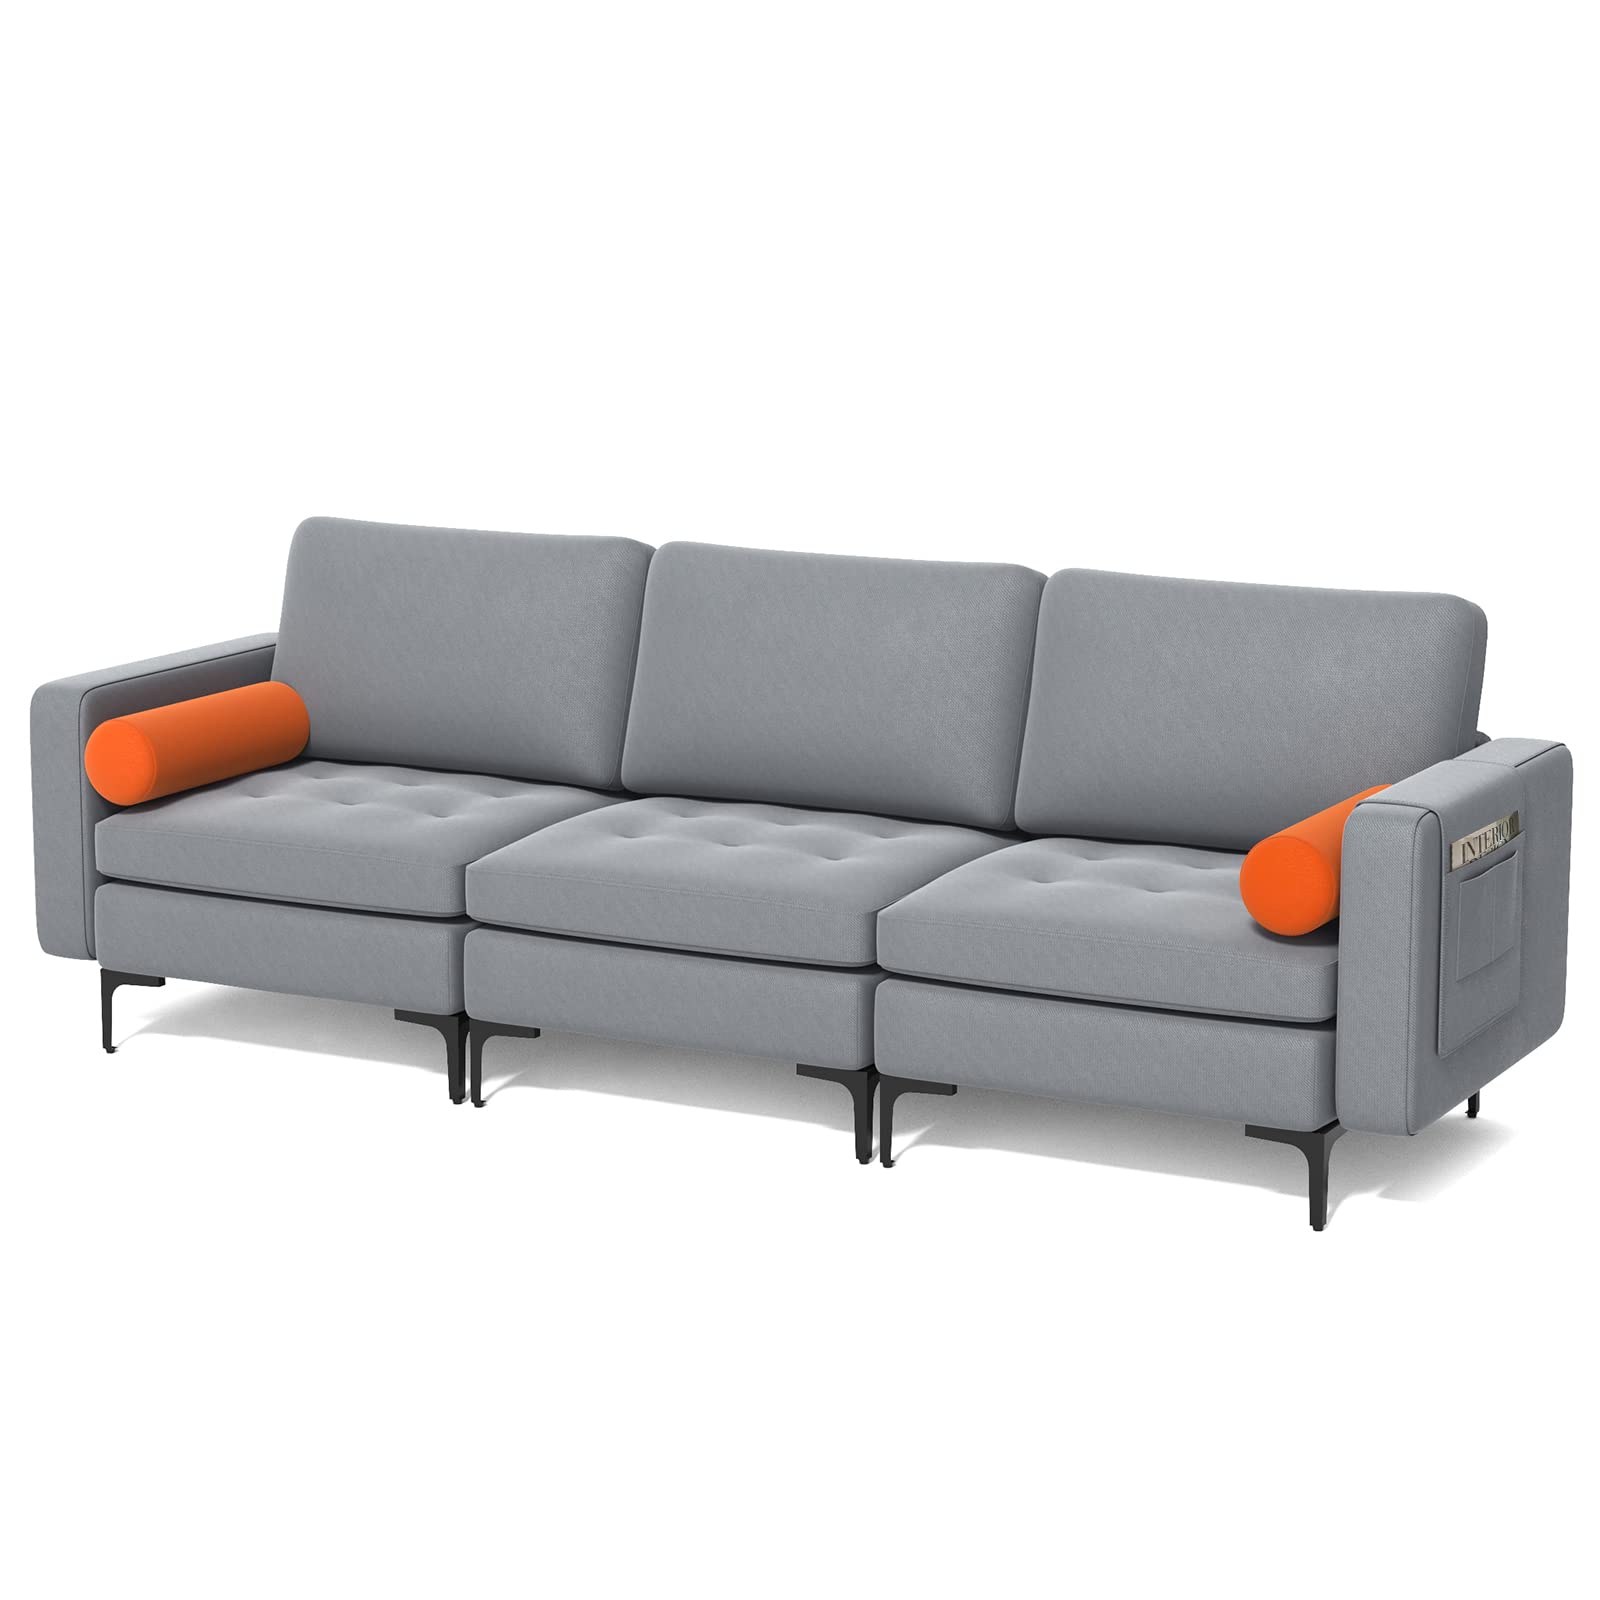 Giantex 97" Sectional Sofa Couch, 3-Seater Modular Sleeper with USB Ports